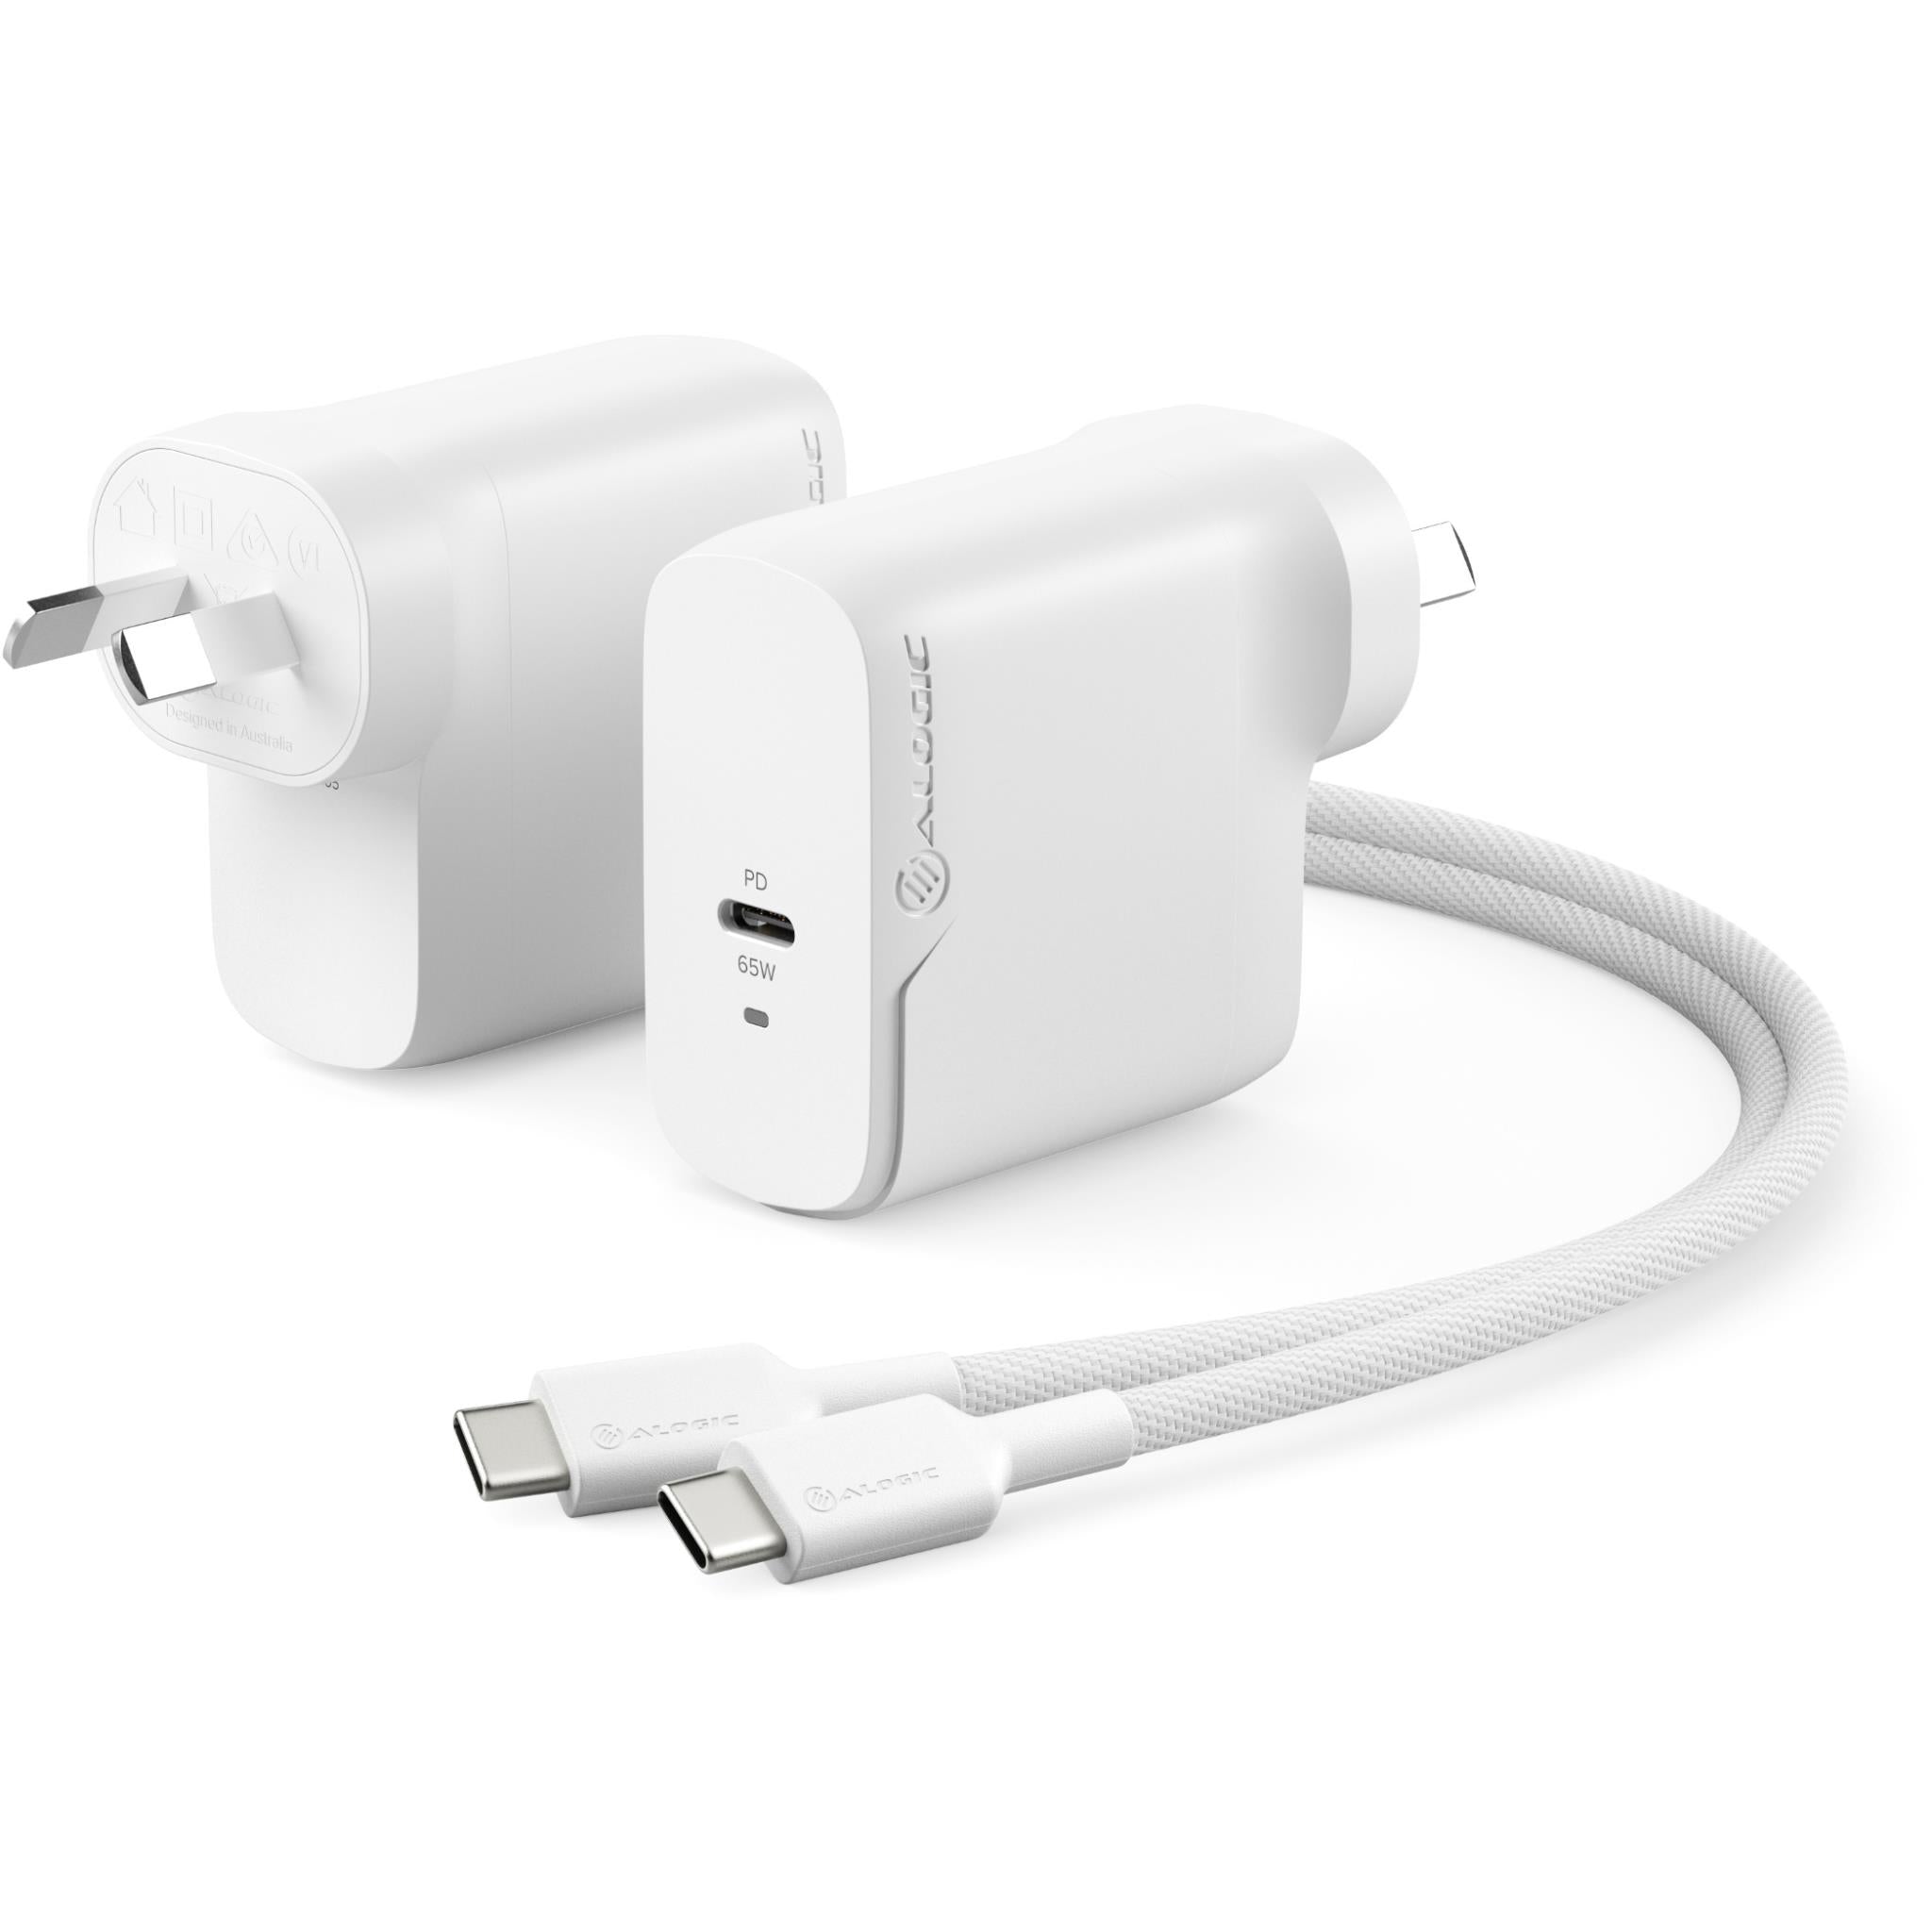 65W Smart USB-C Slim Power Adapter - 6' Fixed USB-C cable